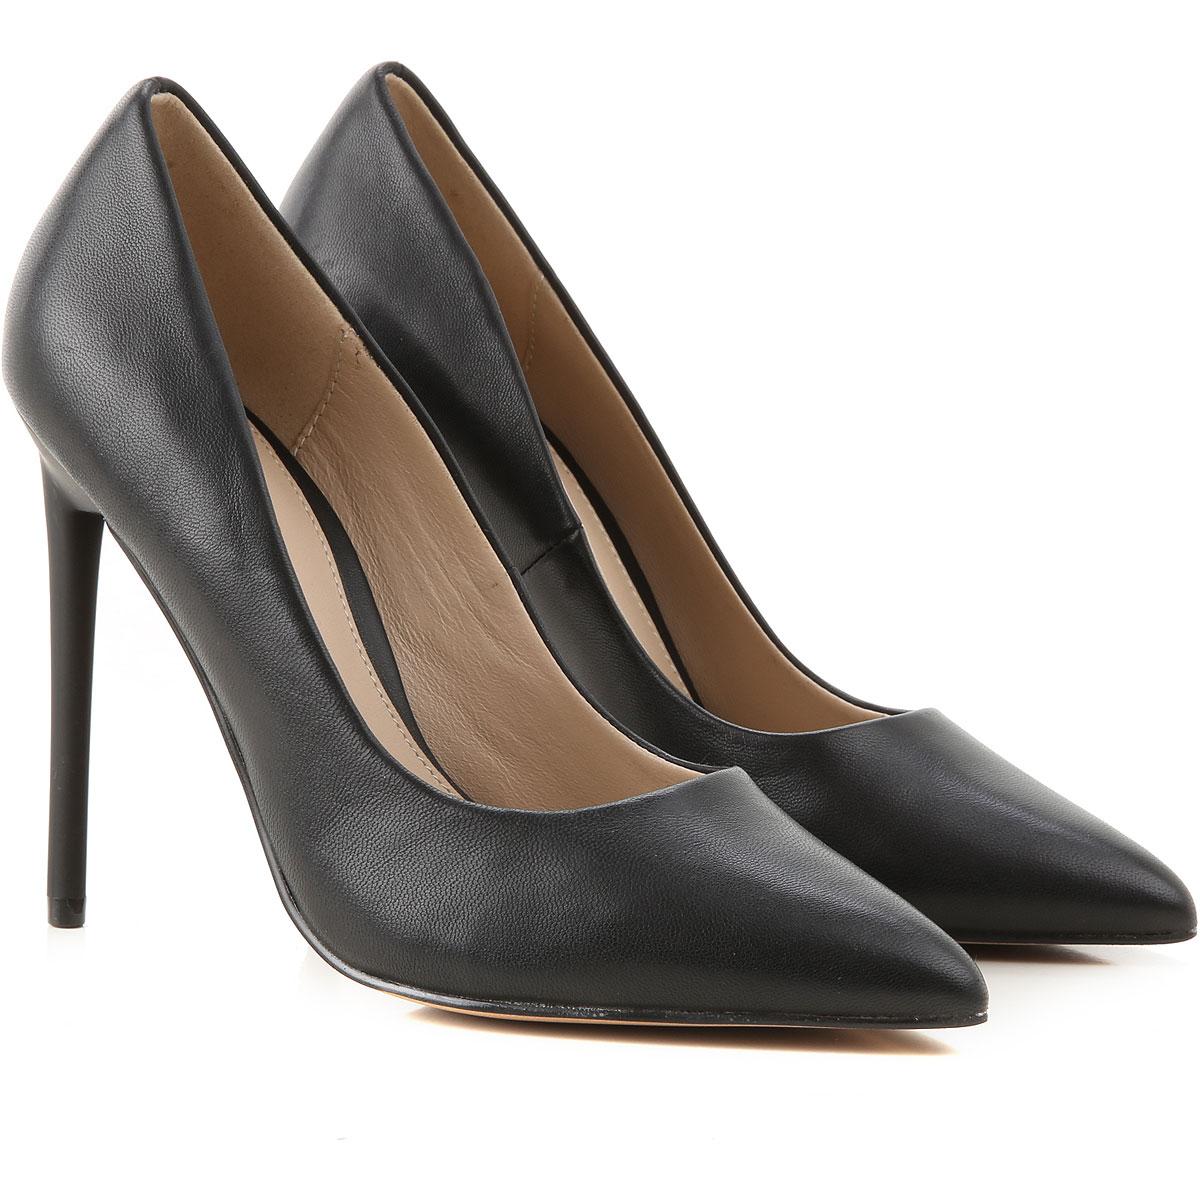 Guess Pumps & High Heels For Women in Black - Lyst